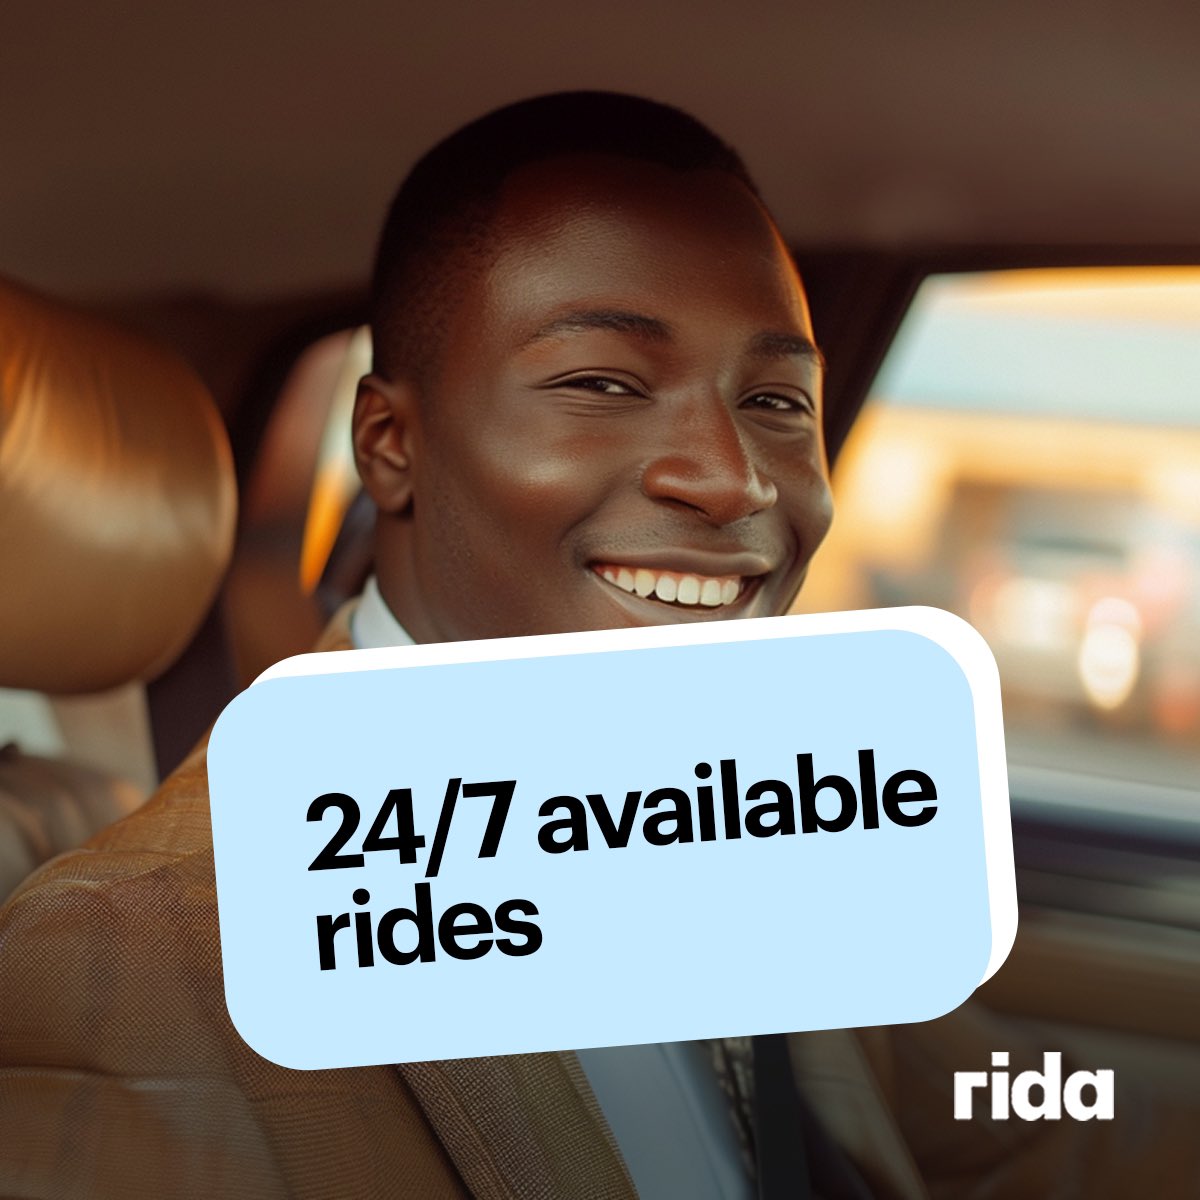 We provide a 24/7 round the clock ride service which allows you book a ride at anytime of the day Download Rida App in App Store and Google Play 🚙 #RidaApp